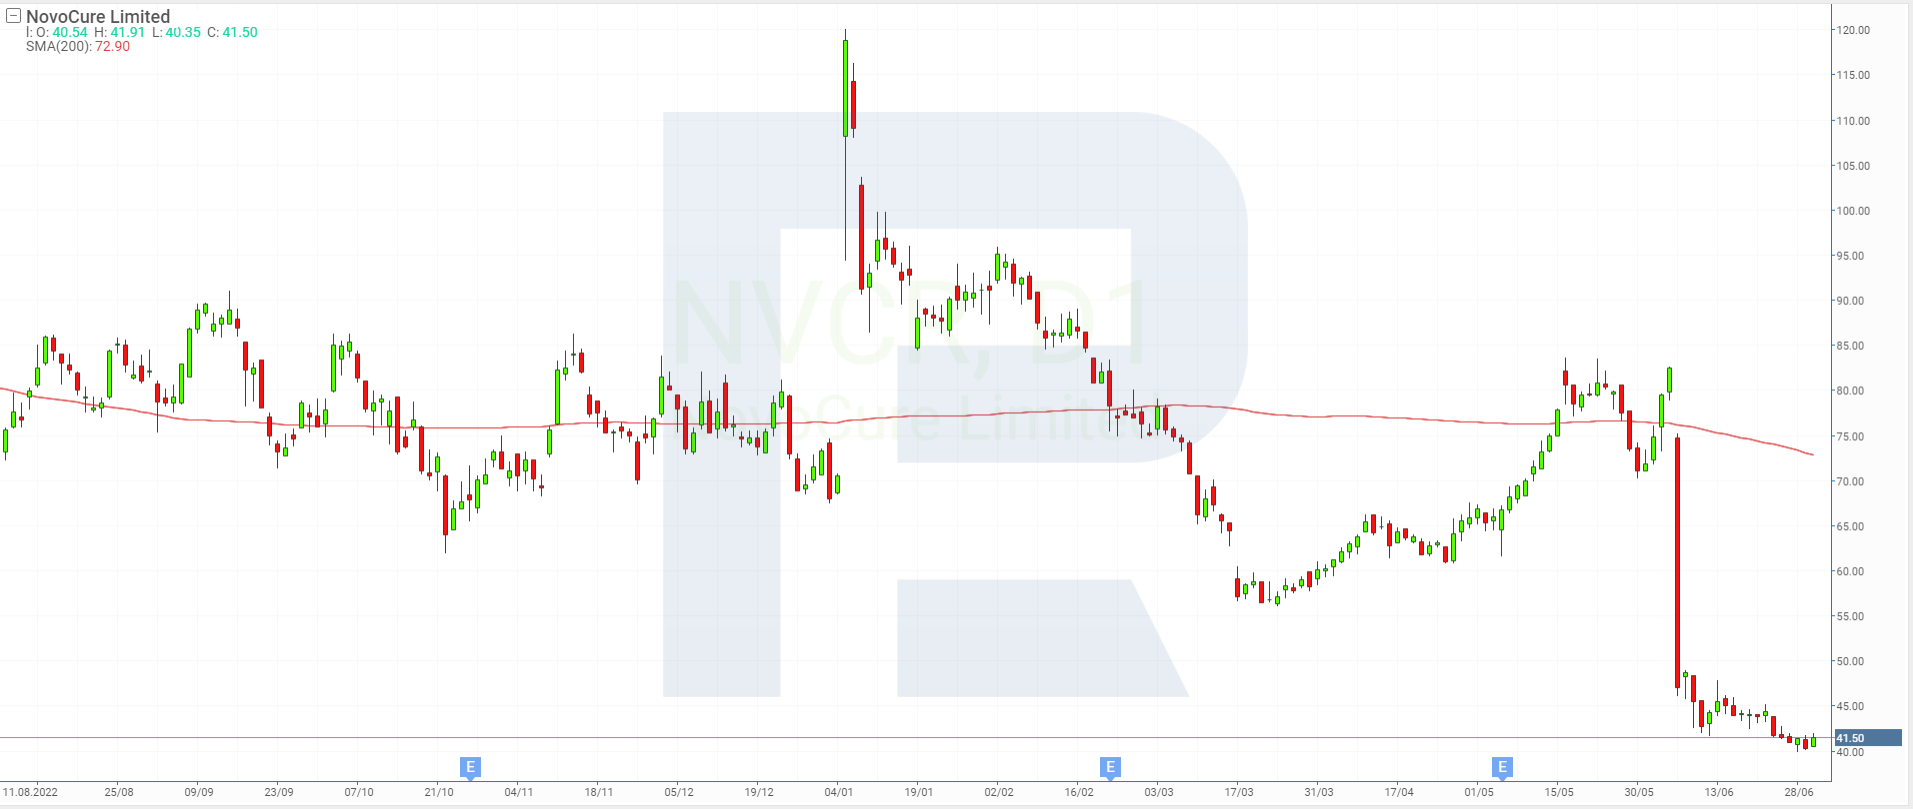 Stock chart of NovoCure Limited